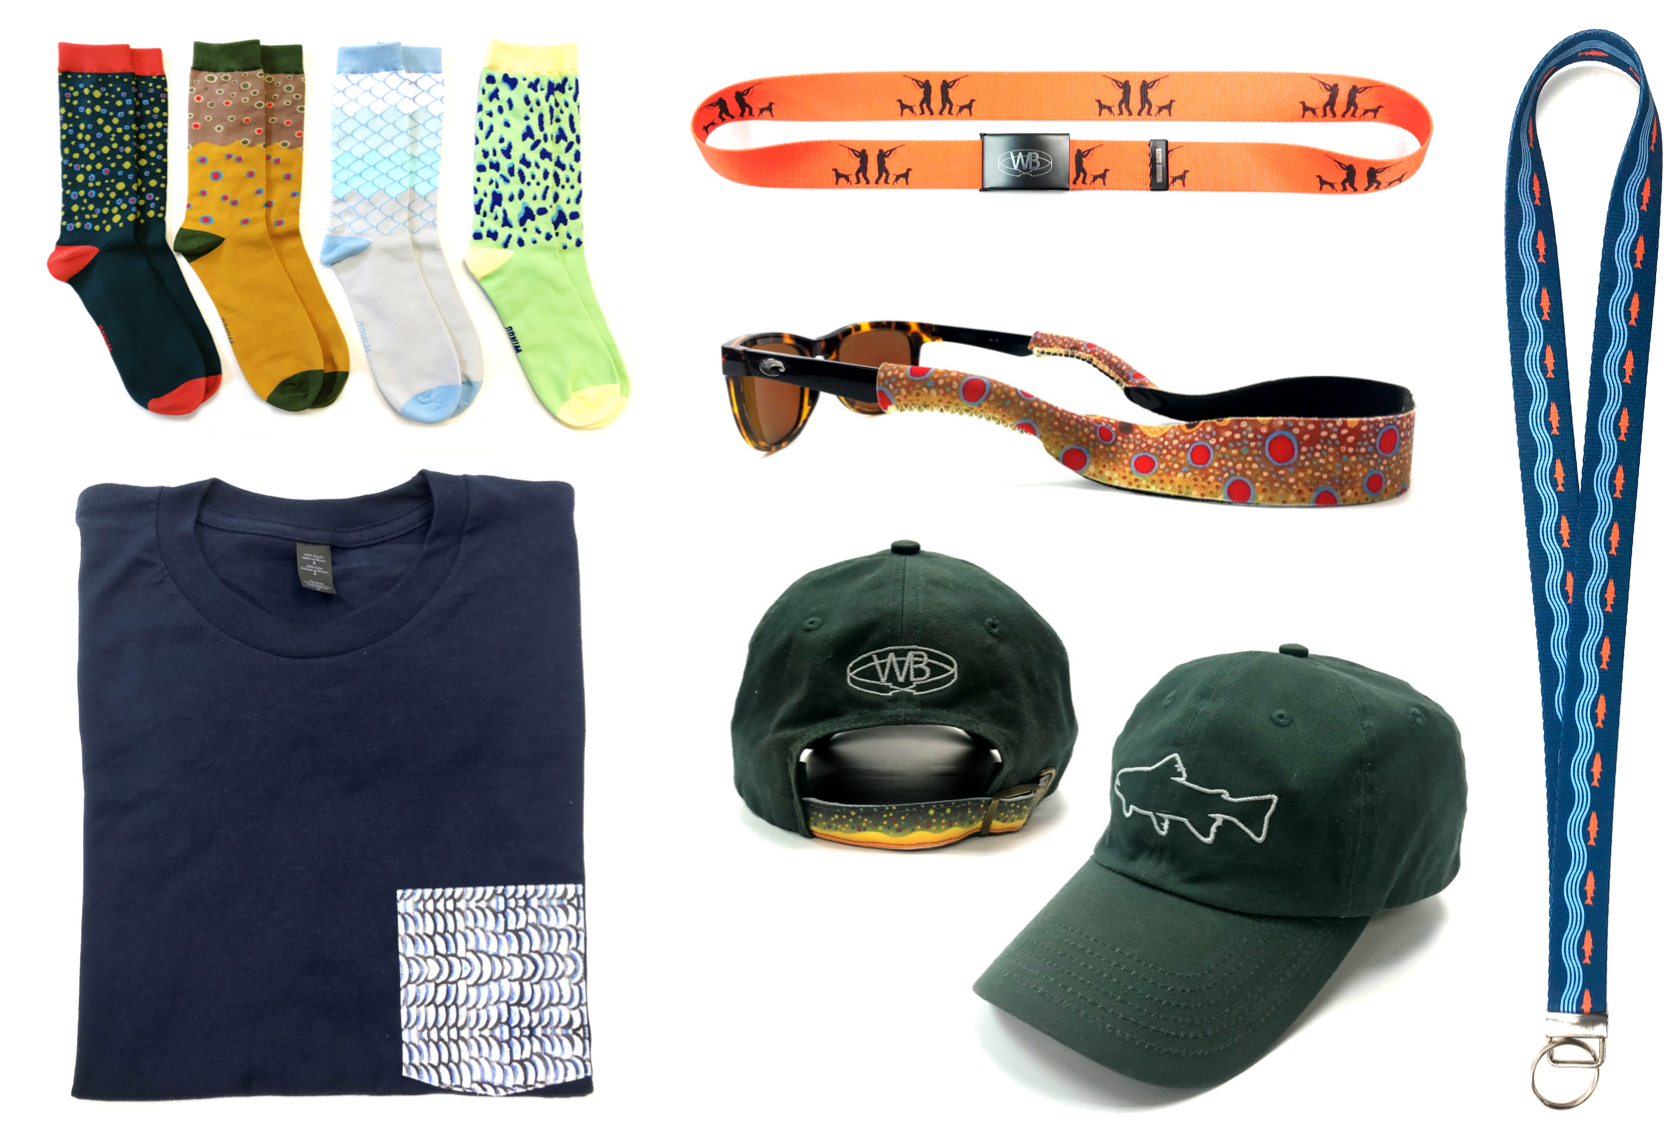 Wingo Belts Introduces All-New Hats, Tees, Socks, Eyewear Retainers & More For 2018